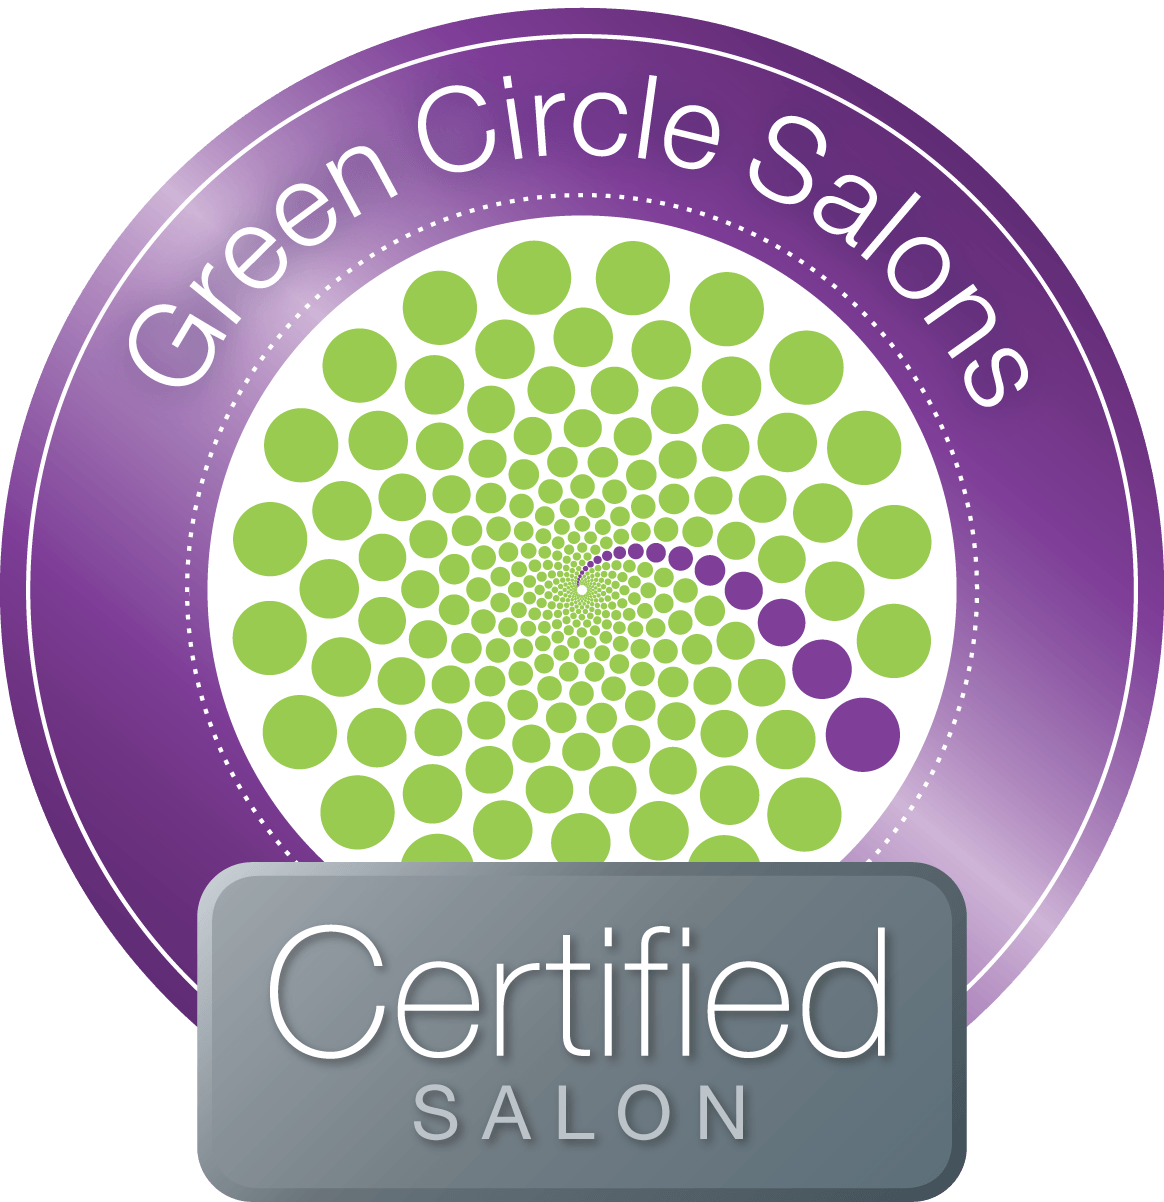 That Is a Green Circle Logo - Curb Appeal Salon & Spa - Omaha, NE - Recycling